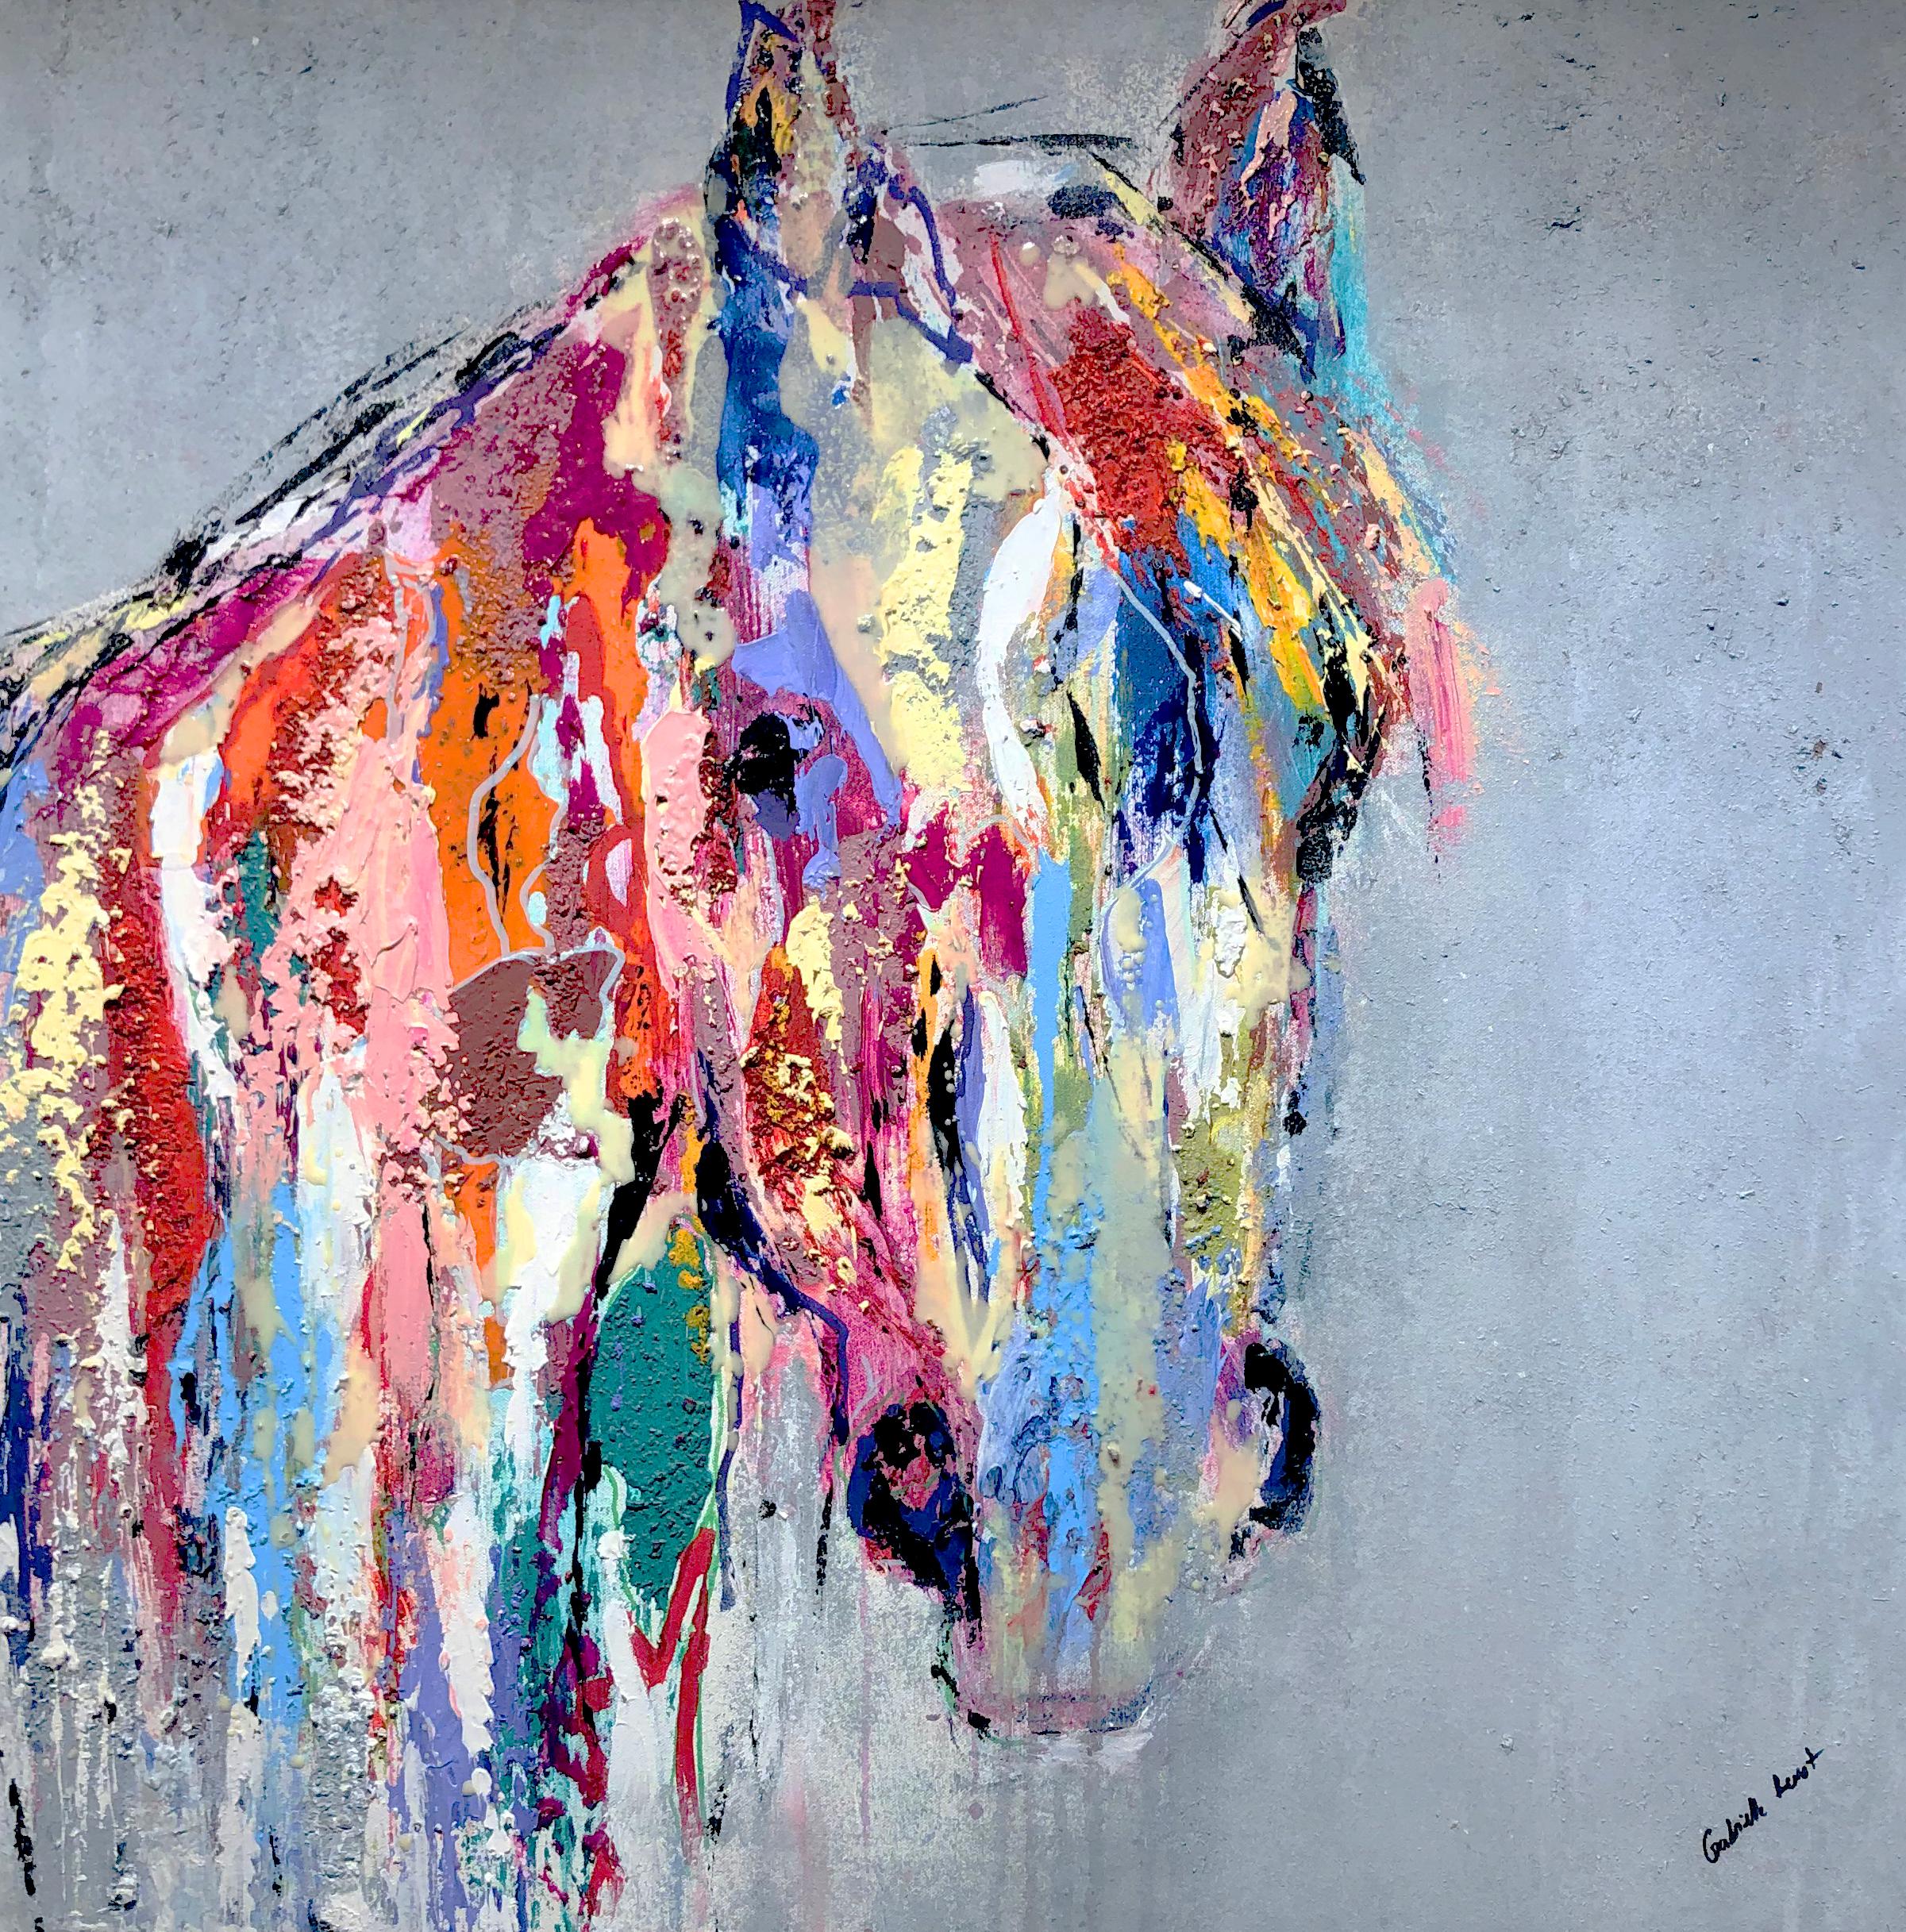 Gabrielle Benot "Merrick II" Equine Textured Abstract Mixed Media on Canvas